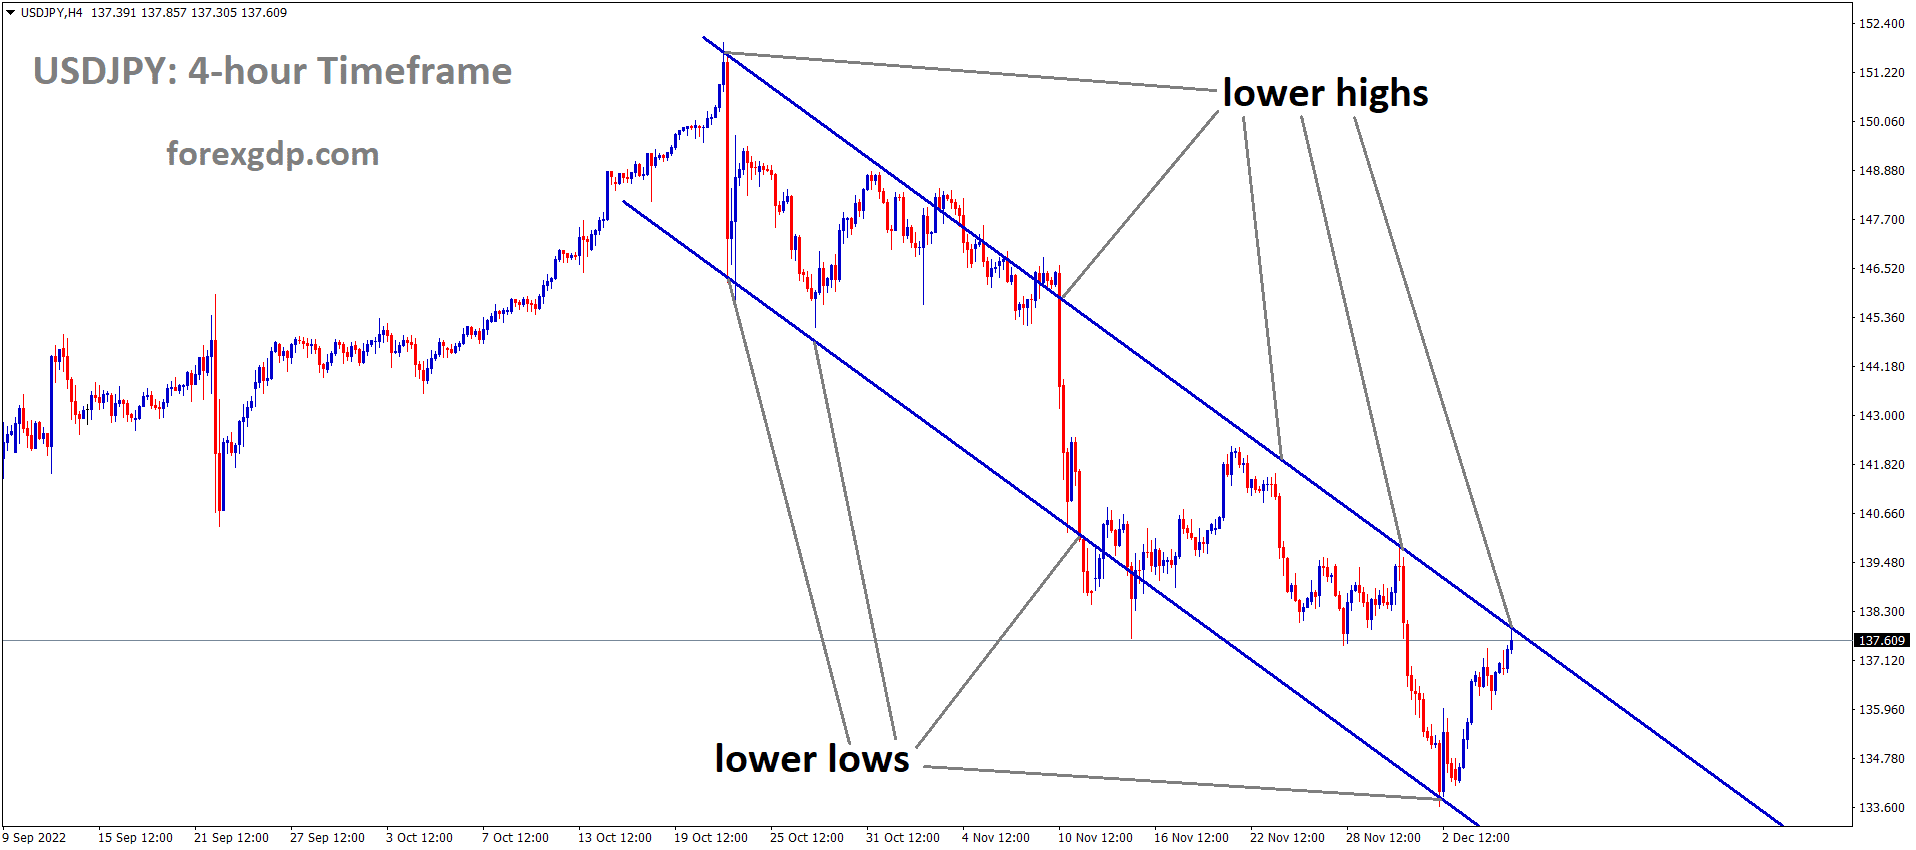 USDJPY is moving in the Descending channel and the market has reached the lower high area of the channel 1